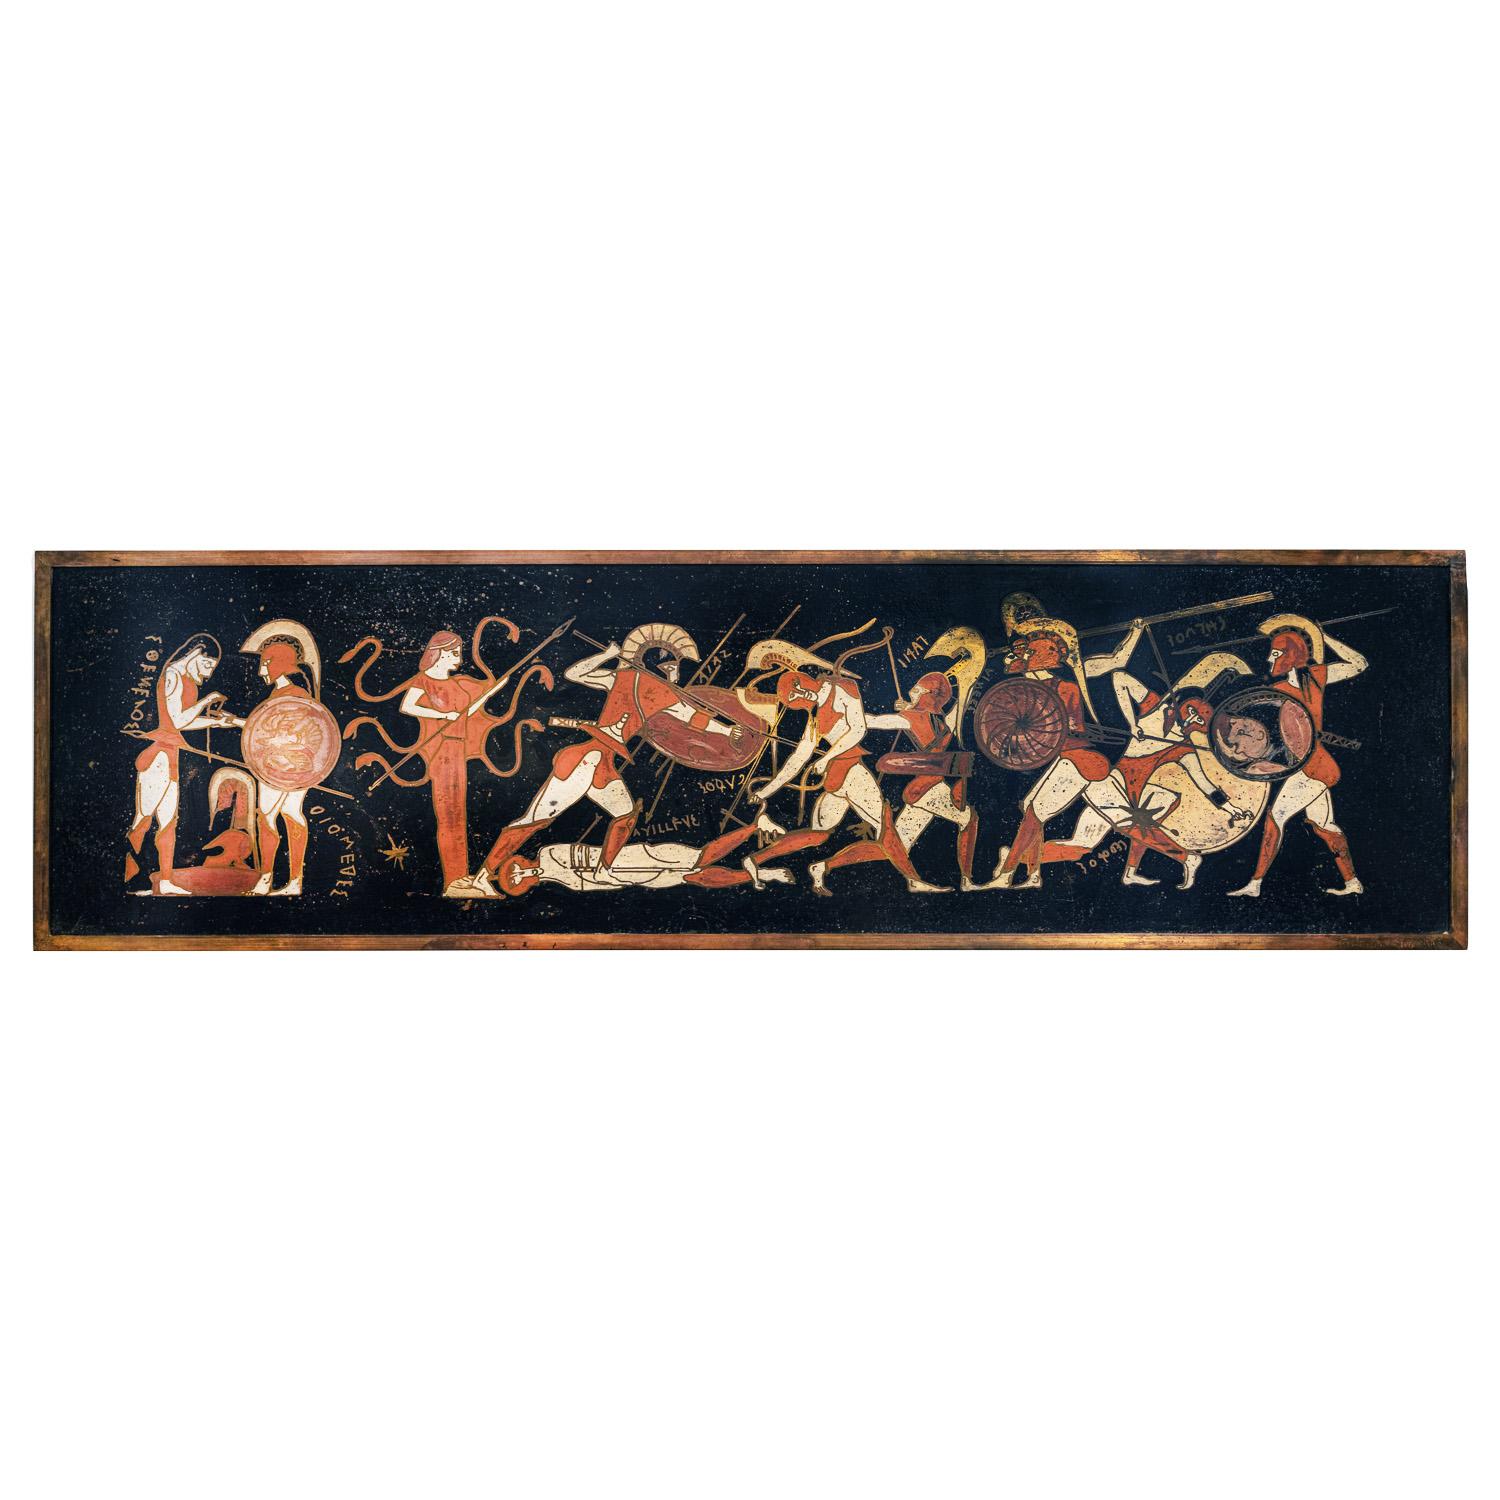 Early rare painting of a Greek mythology scene with Medusa and warriors on patinated and engraved bronze and pewter with colorful enamel cloisonne by Philip & Kelvin LaVerne, American 1959 (signed in 2 places and dated).  Philip and Kelvin LaVerne